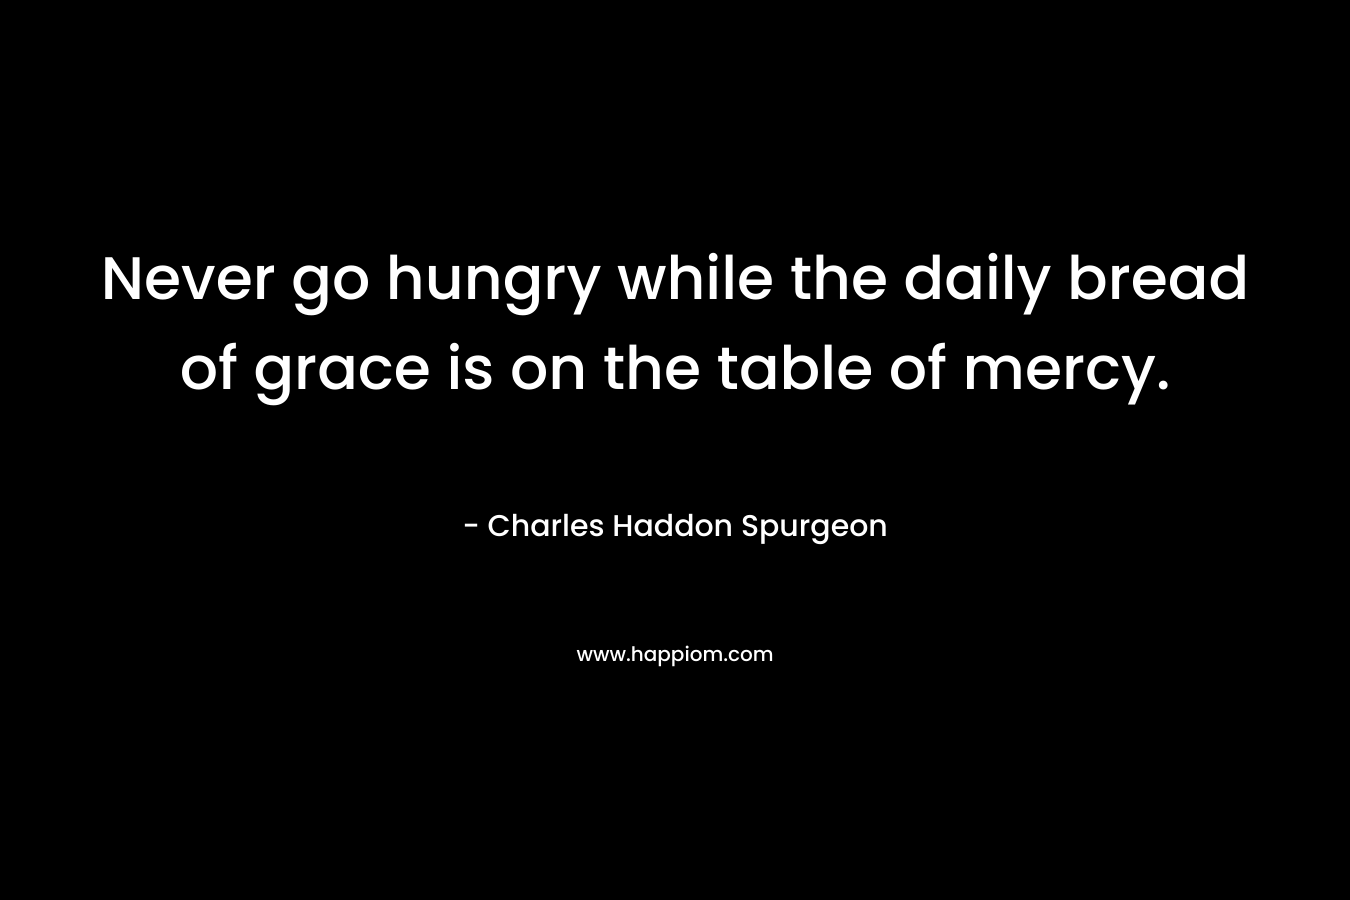 Never go hungry while the daily bread of grace is on the table of mercy.